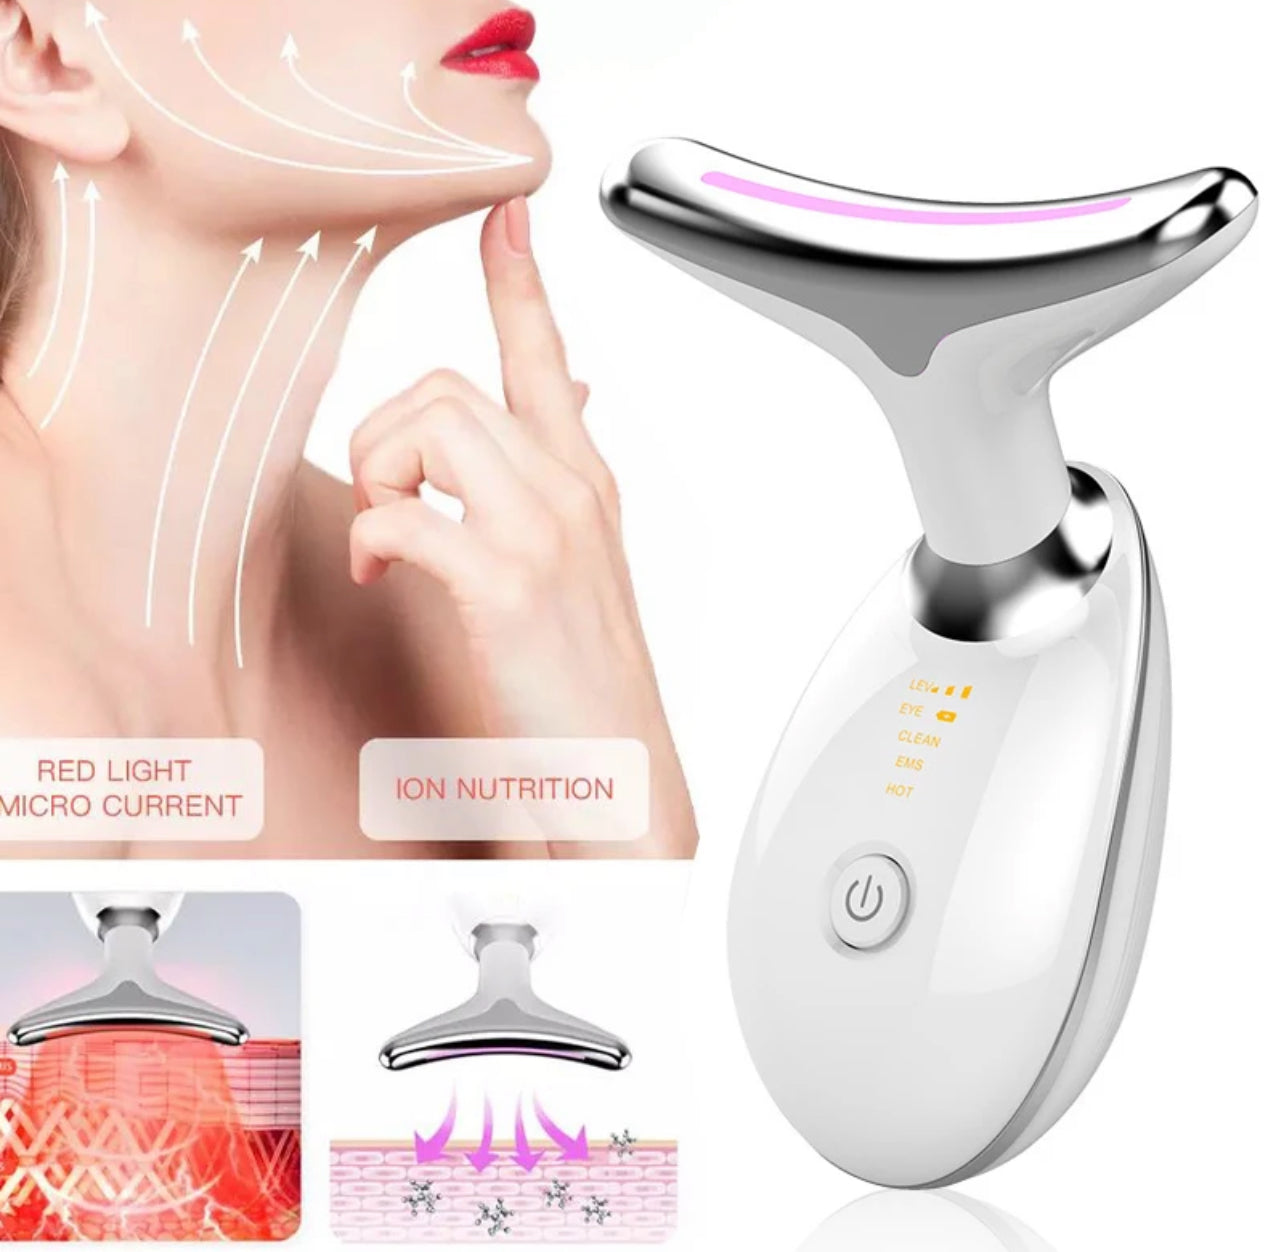 BLUR Anti Wrinkles Face Massager - High Frequency Vibration Anti Aging Facial Device_1